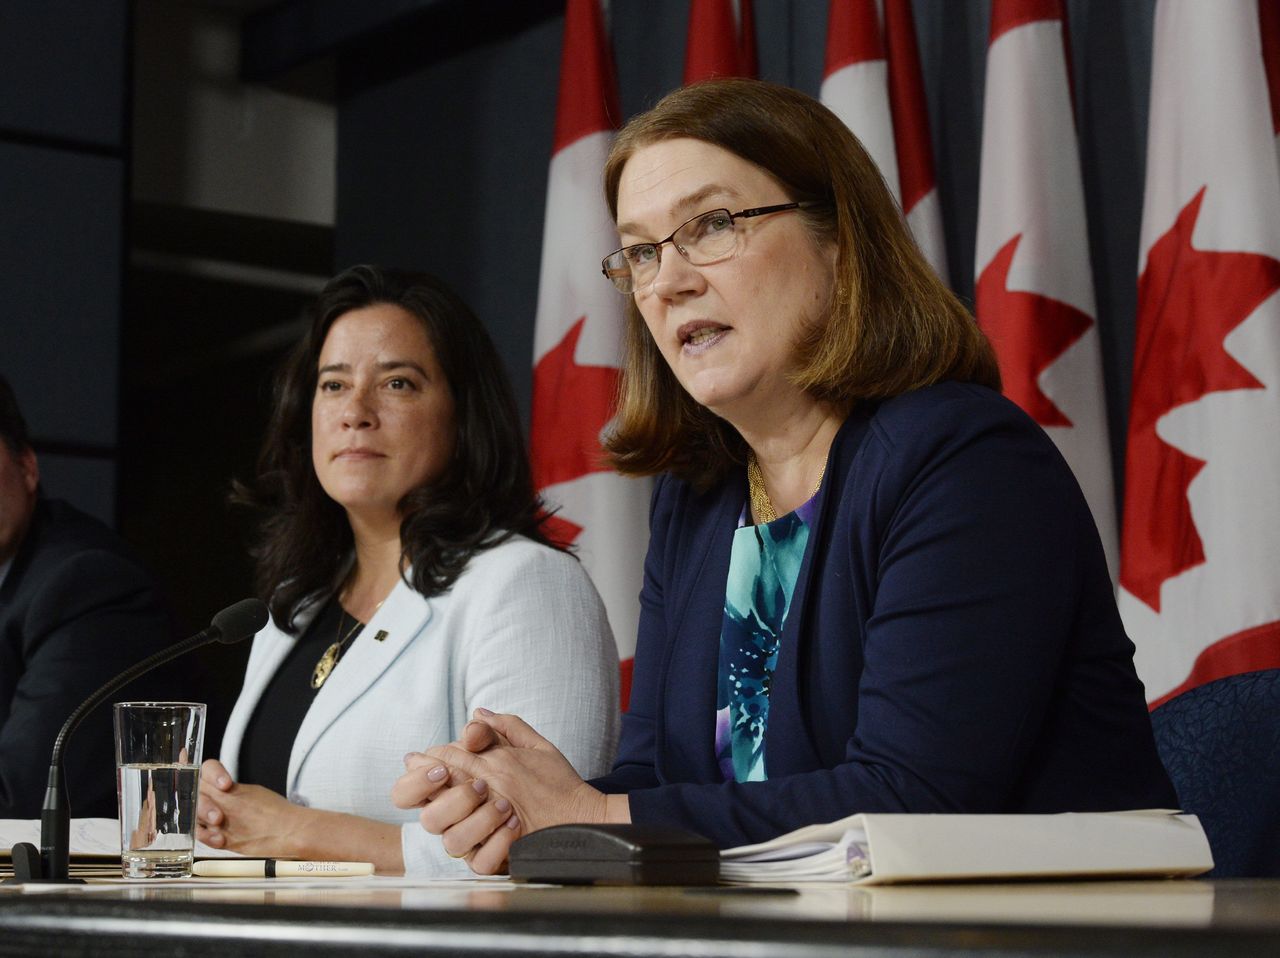 Canada’s Health Minister Jane Philpott (right) speaks as Justice Minister Jody Wilson-Raybould listens at a news conference in Ottawa on Thursday. Canada has introduced a new assisted suicide law that will only apply to Canadians and residents, meaning Americans won’t be able to travel to Canada to die. Visitors will be excluded under the proposed law announced Thursday, precluding the prospect of suicide tourism. Canadian government officials said to take advantage of the law the person would have to be eligible for health services in Canada.